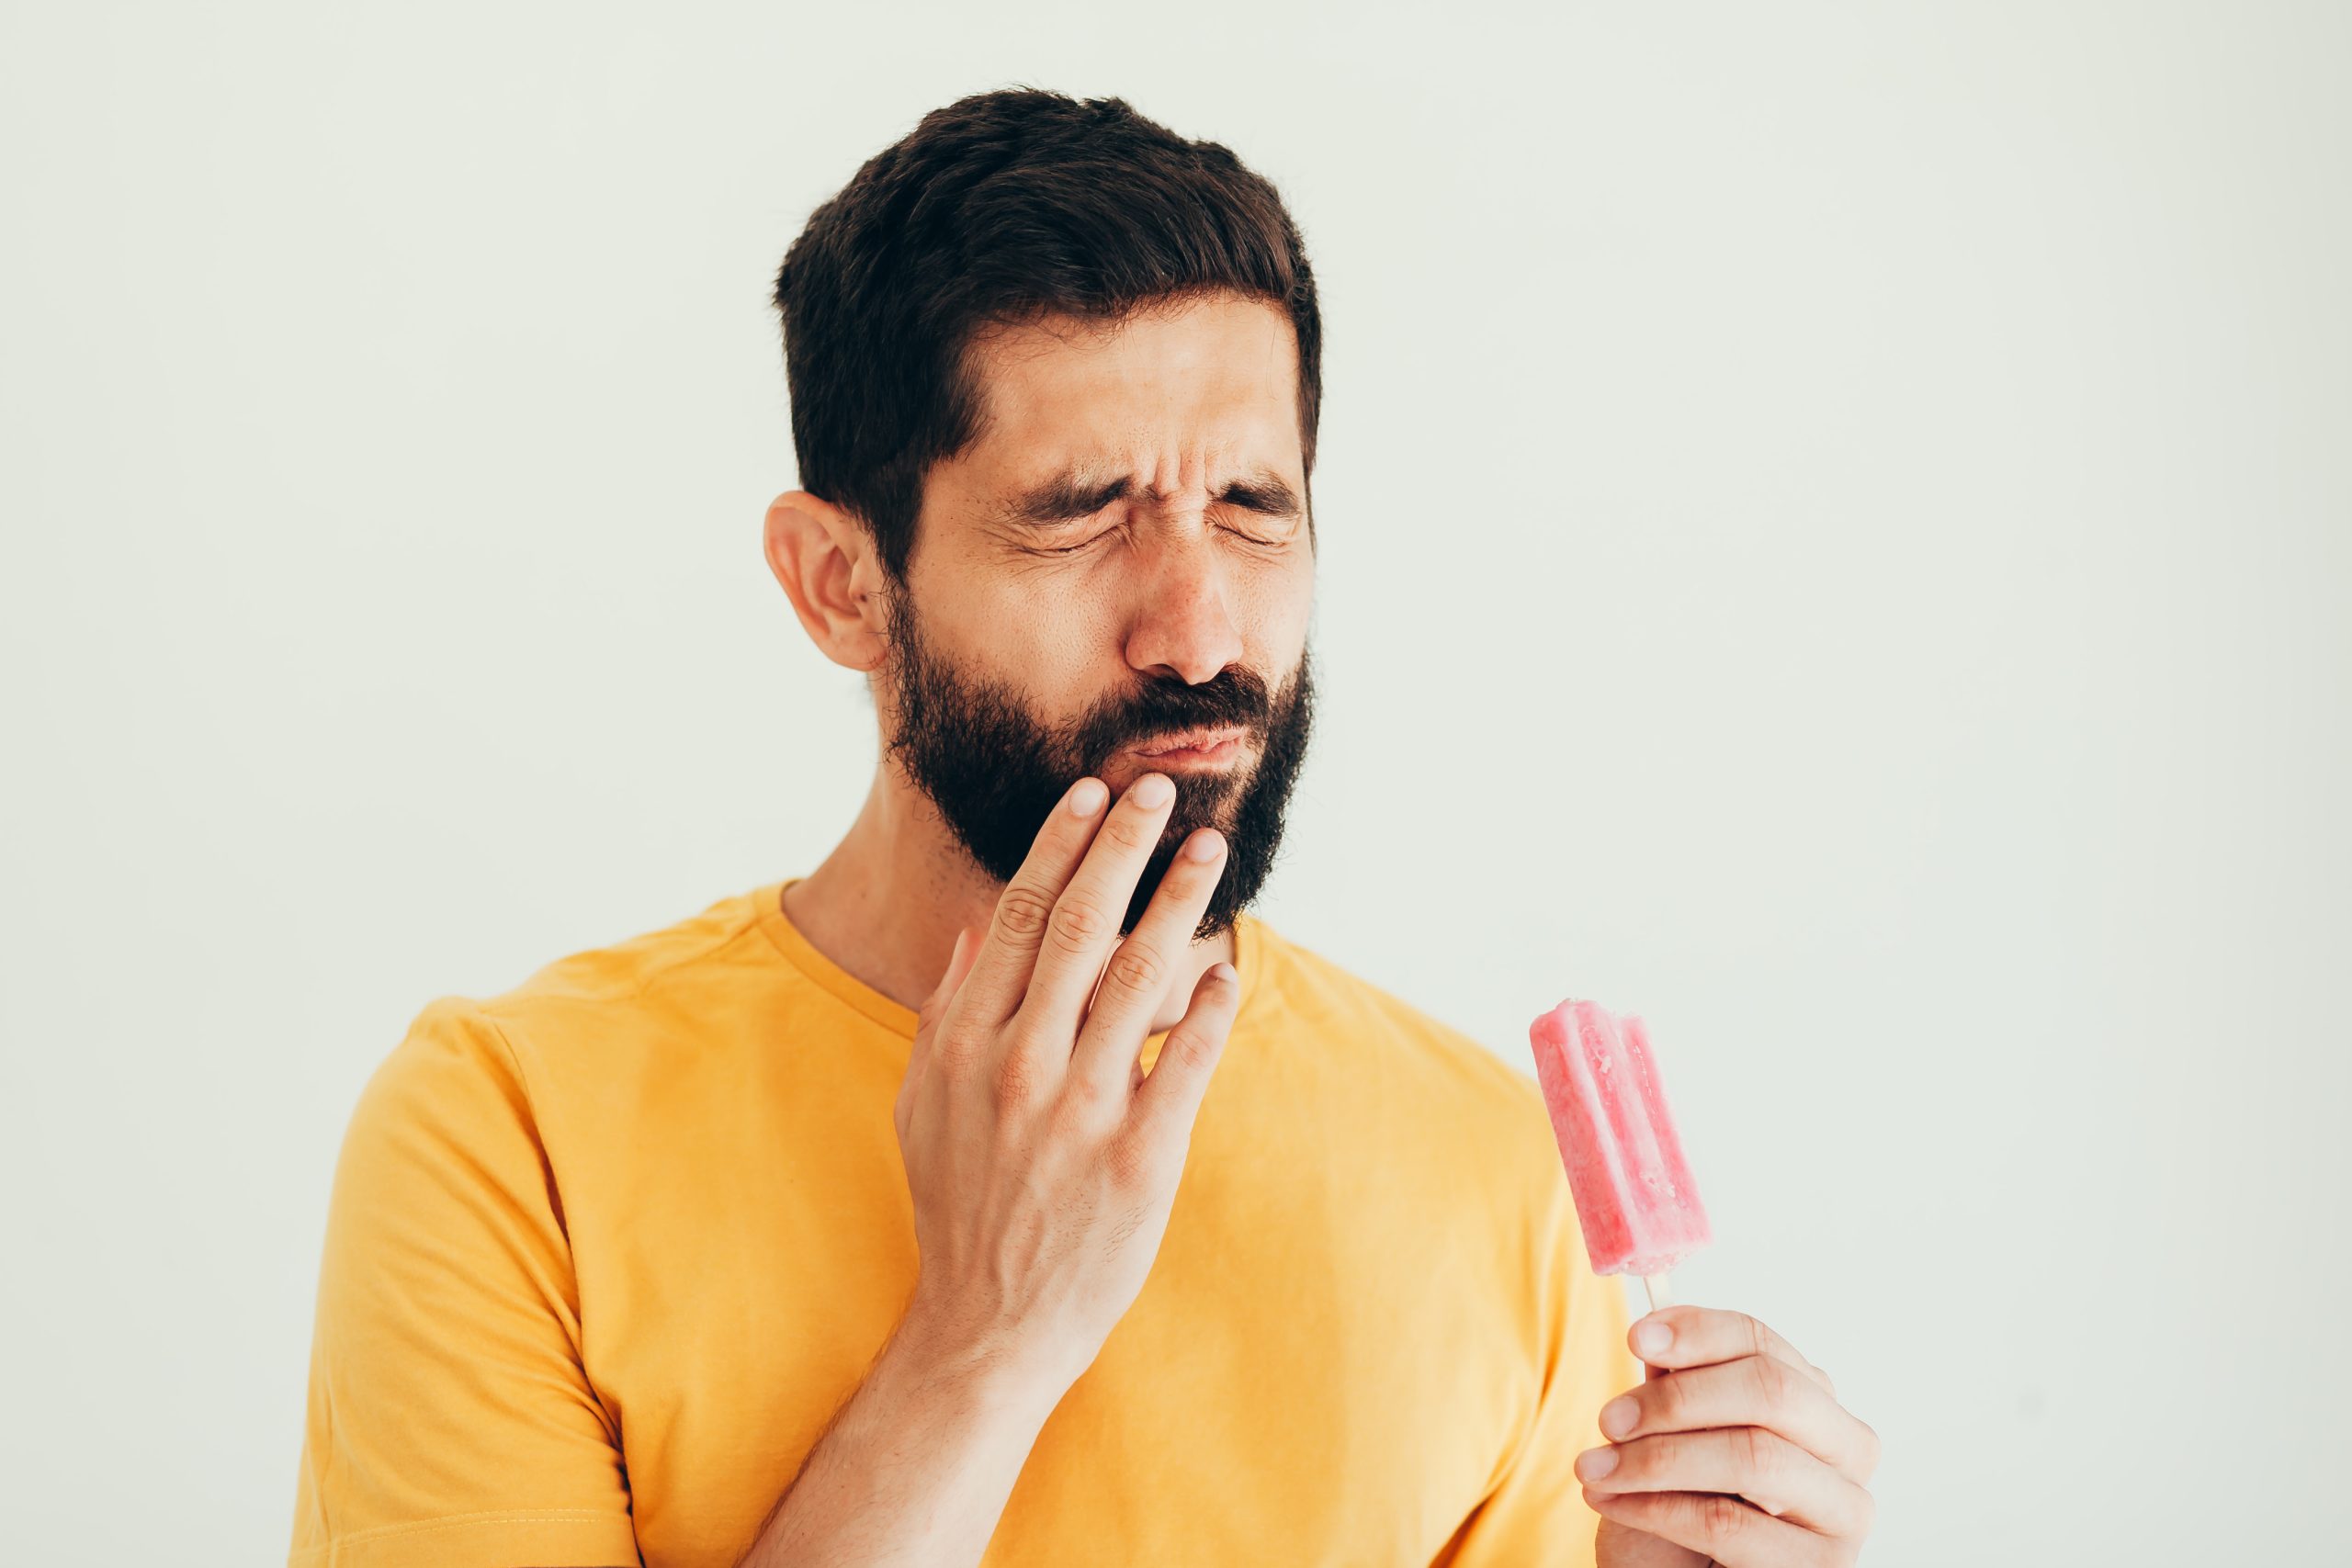 Why Do My Teeth Hurt? Your Guide to Tooth Sensitivity